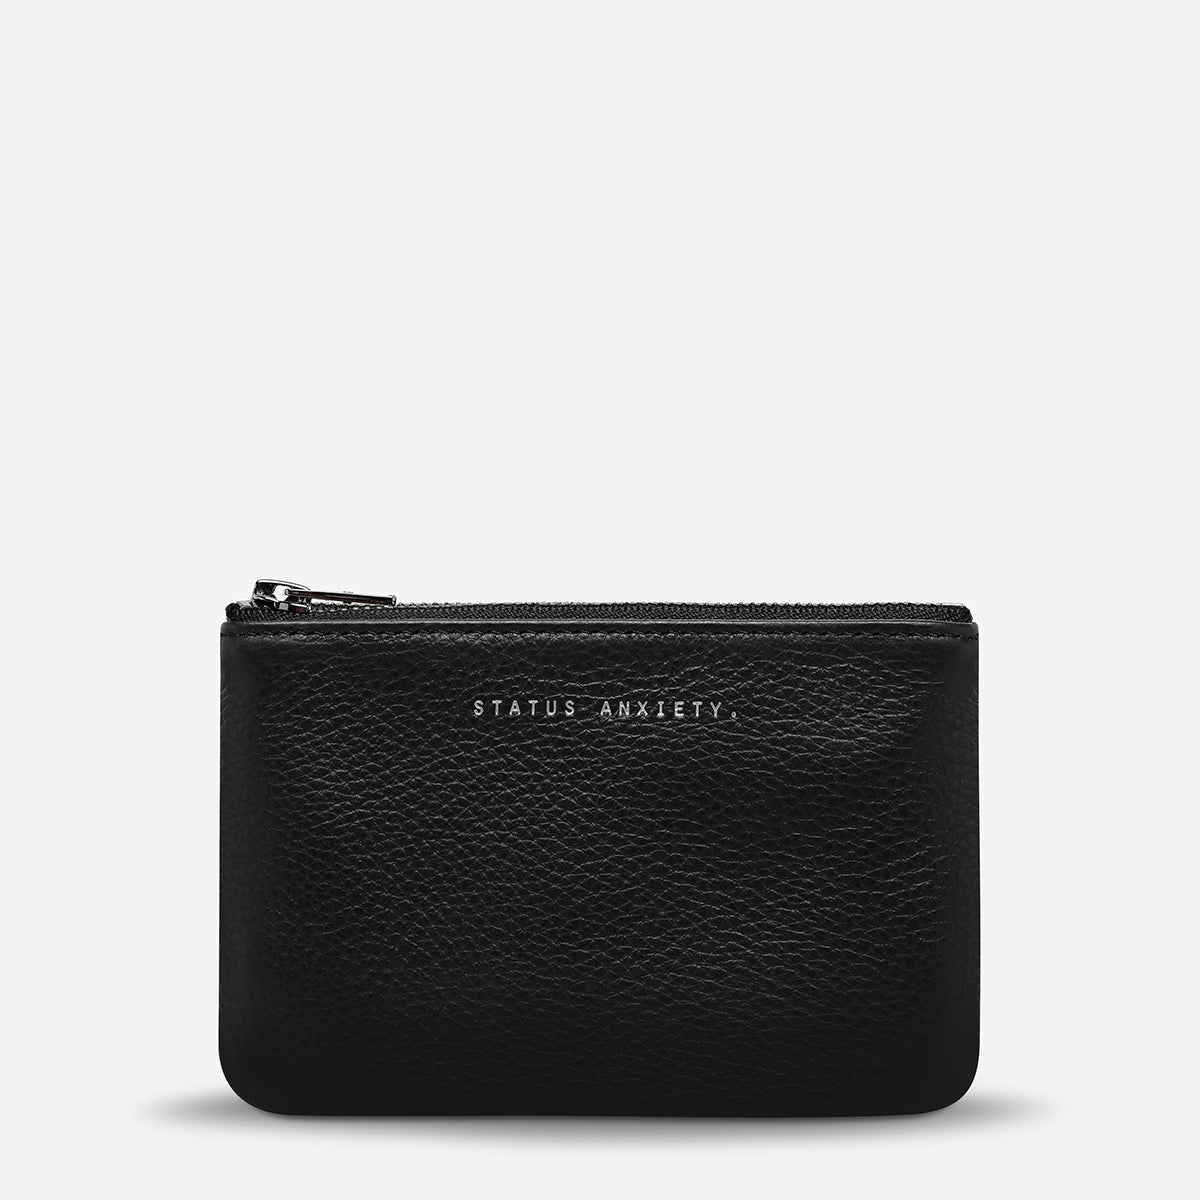 Change It All Black Leather Pouch - Status Anxiety - Mandi at Home